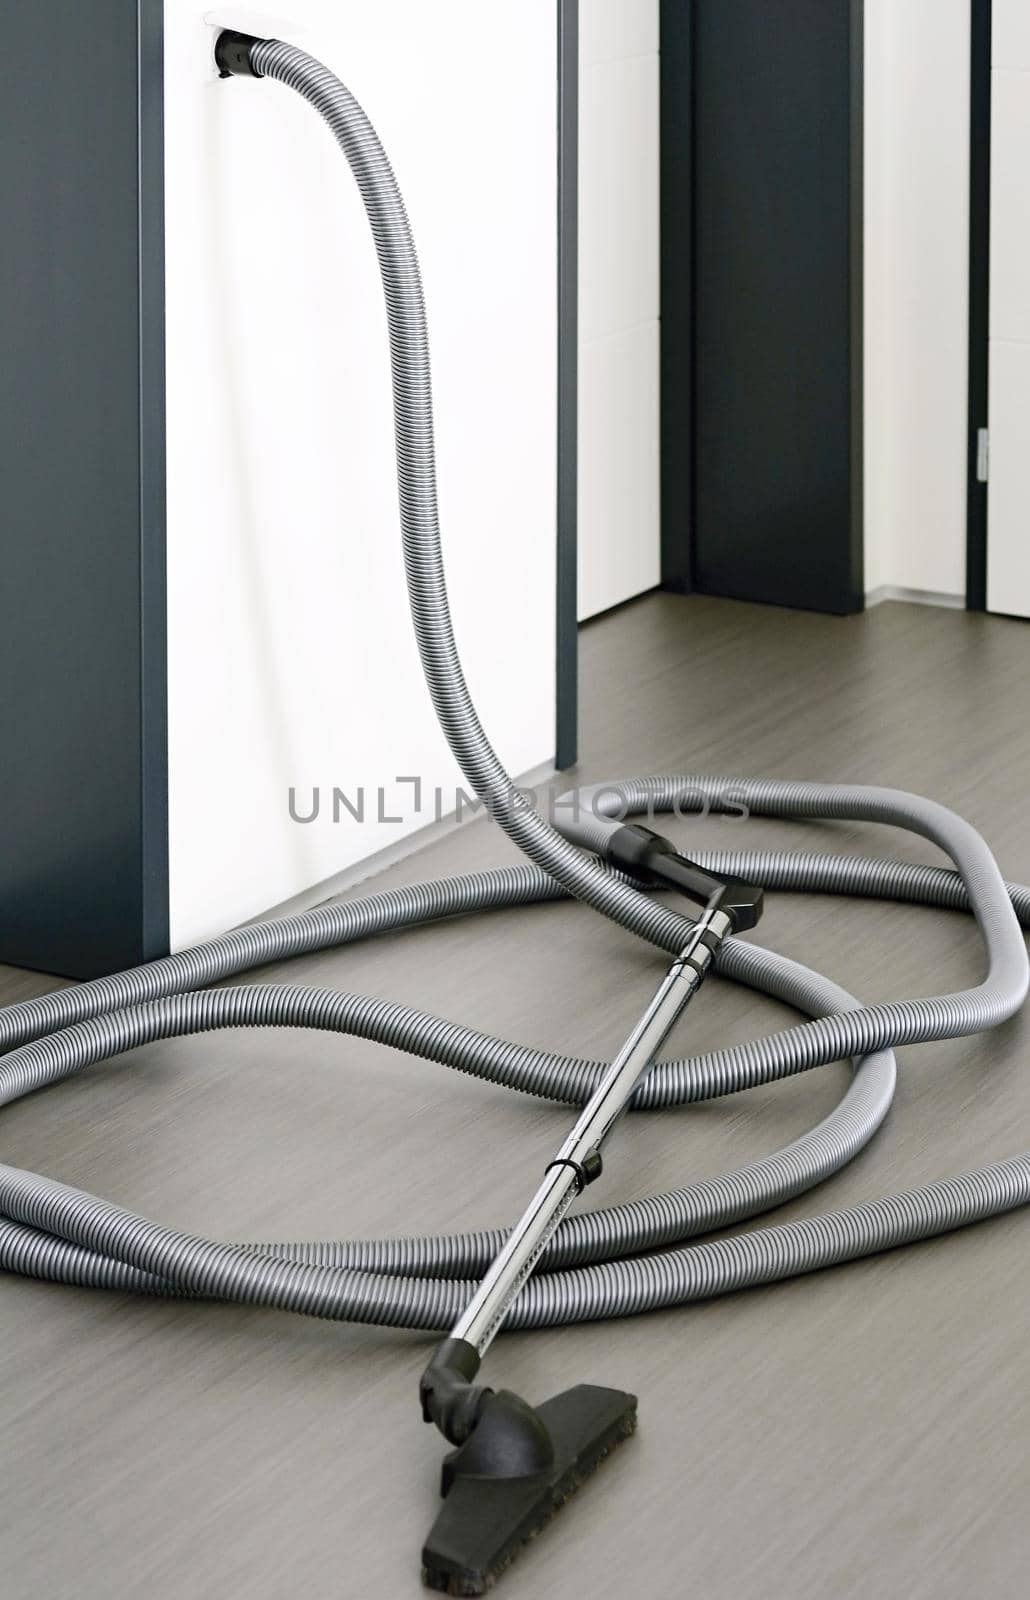 Central vacuum cleaner hose in living room by hamik